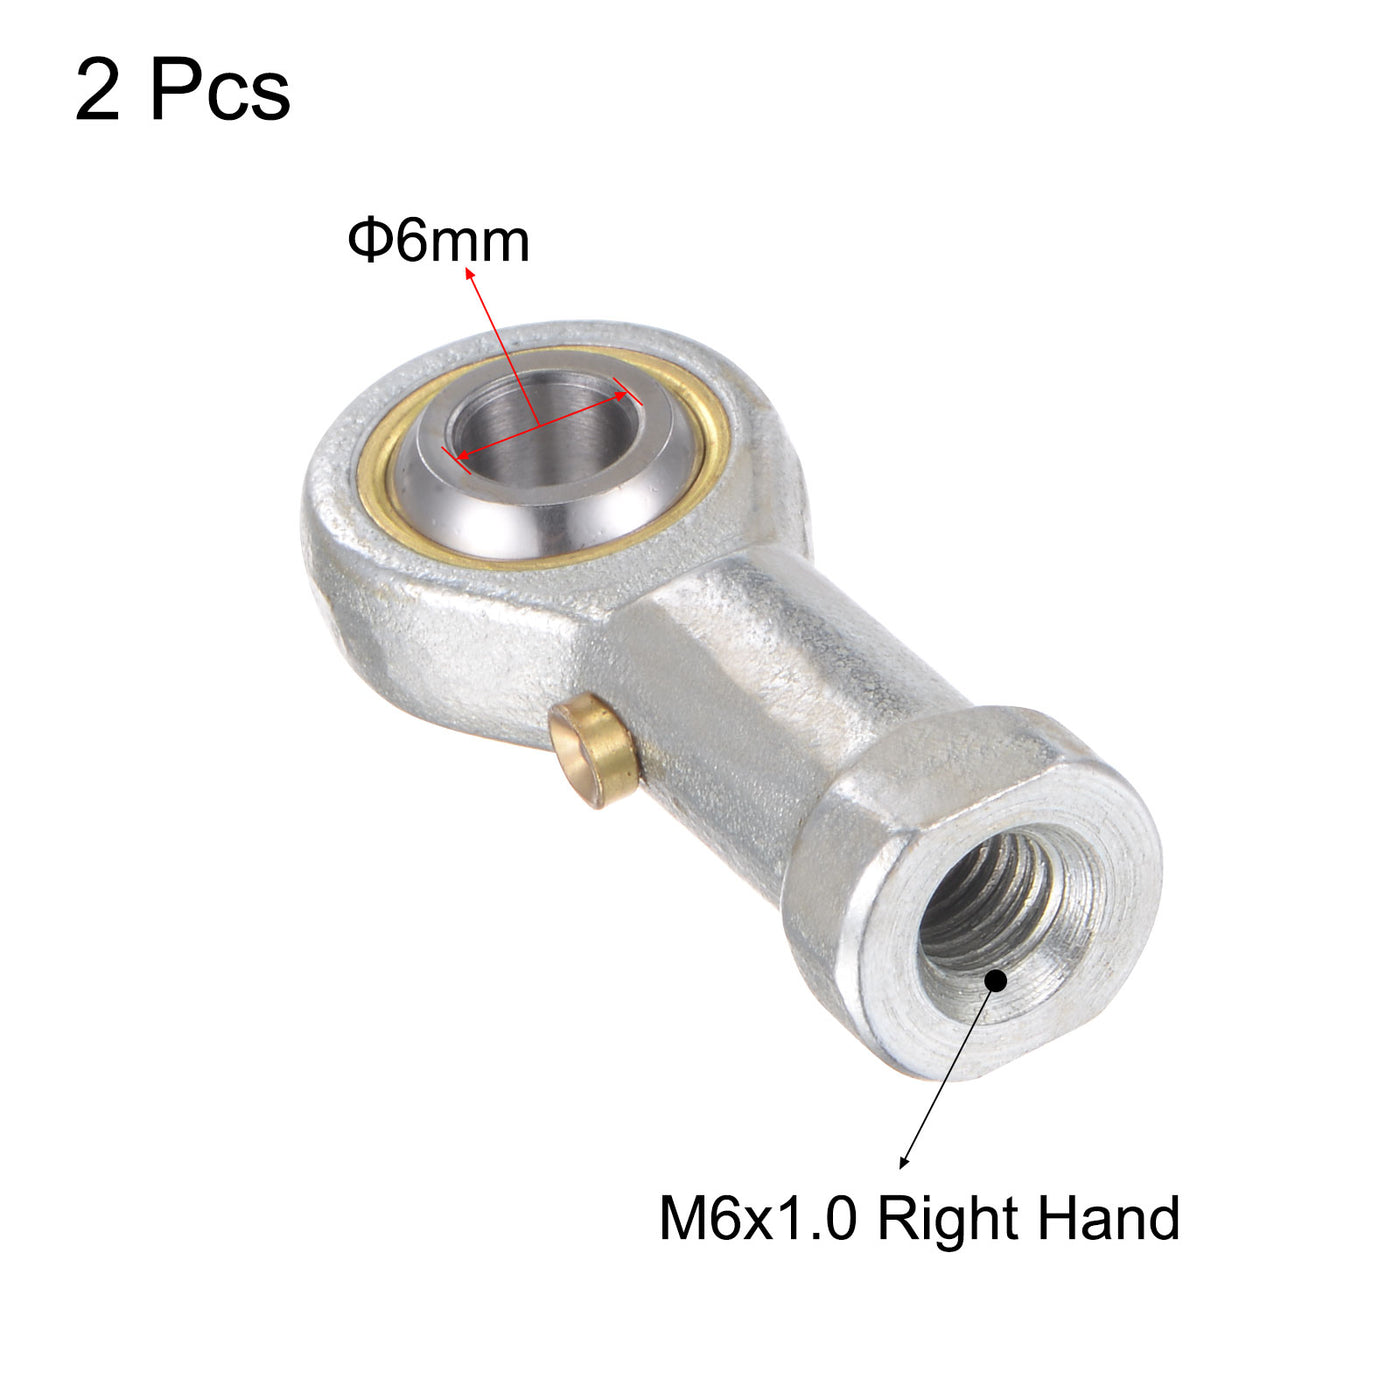 uxcell Uxcell 2pcs PHS6 Rod End Bearing 6mm Bore Self-lubricated M6 Right Hand Female Thread